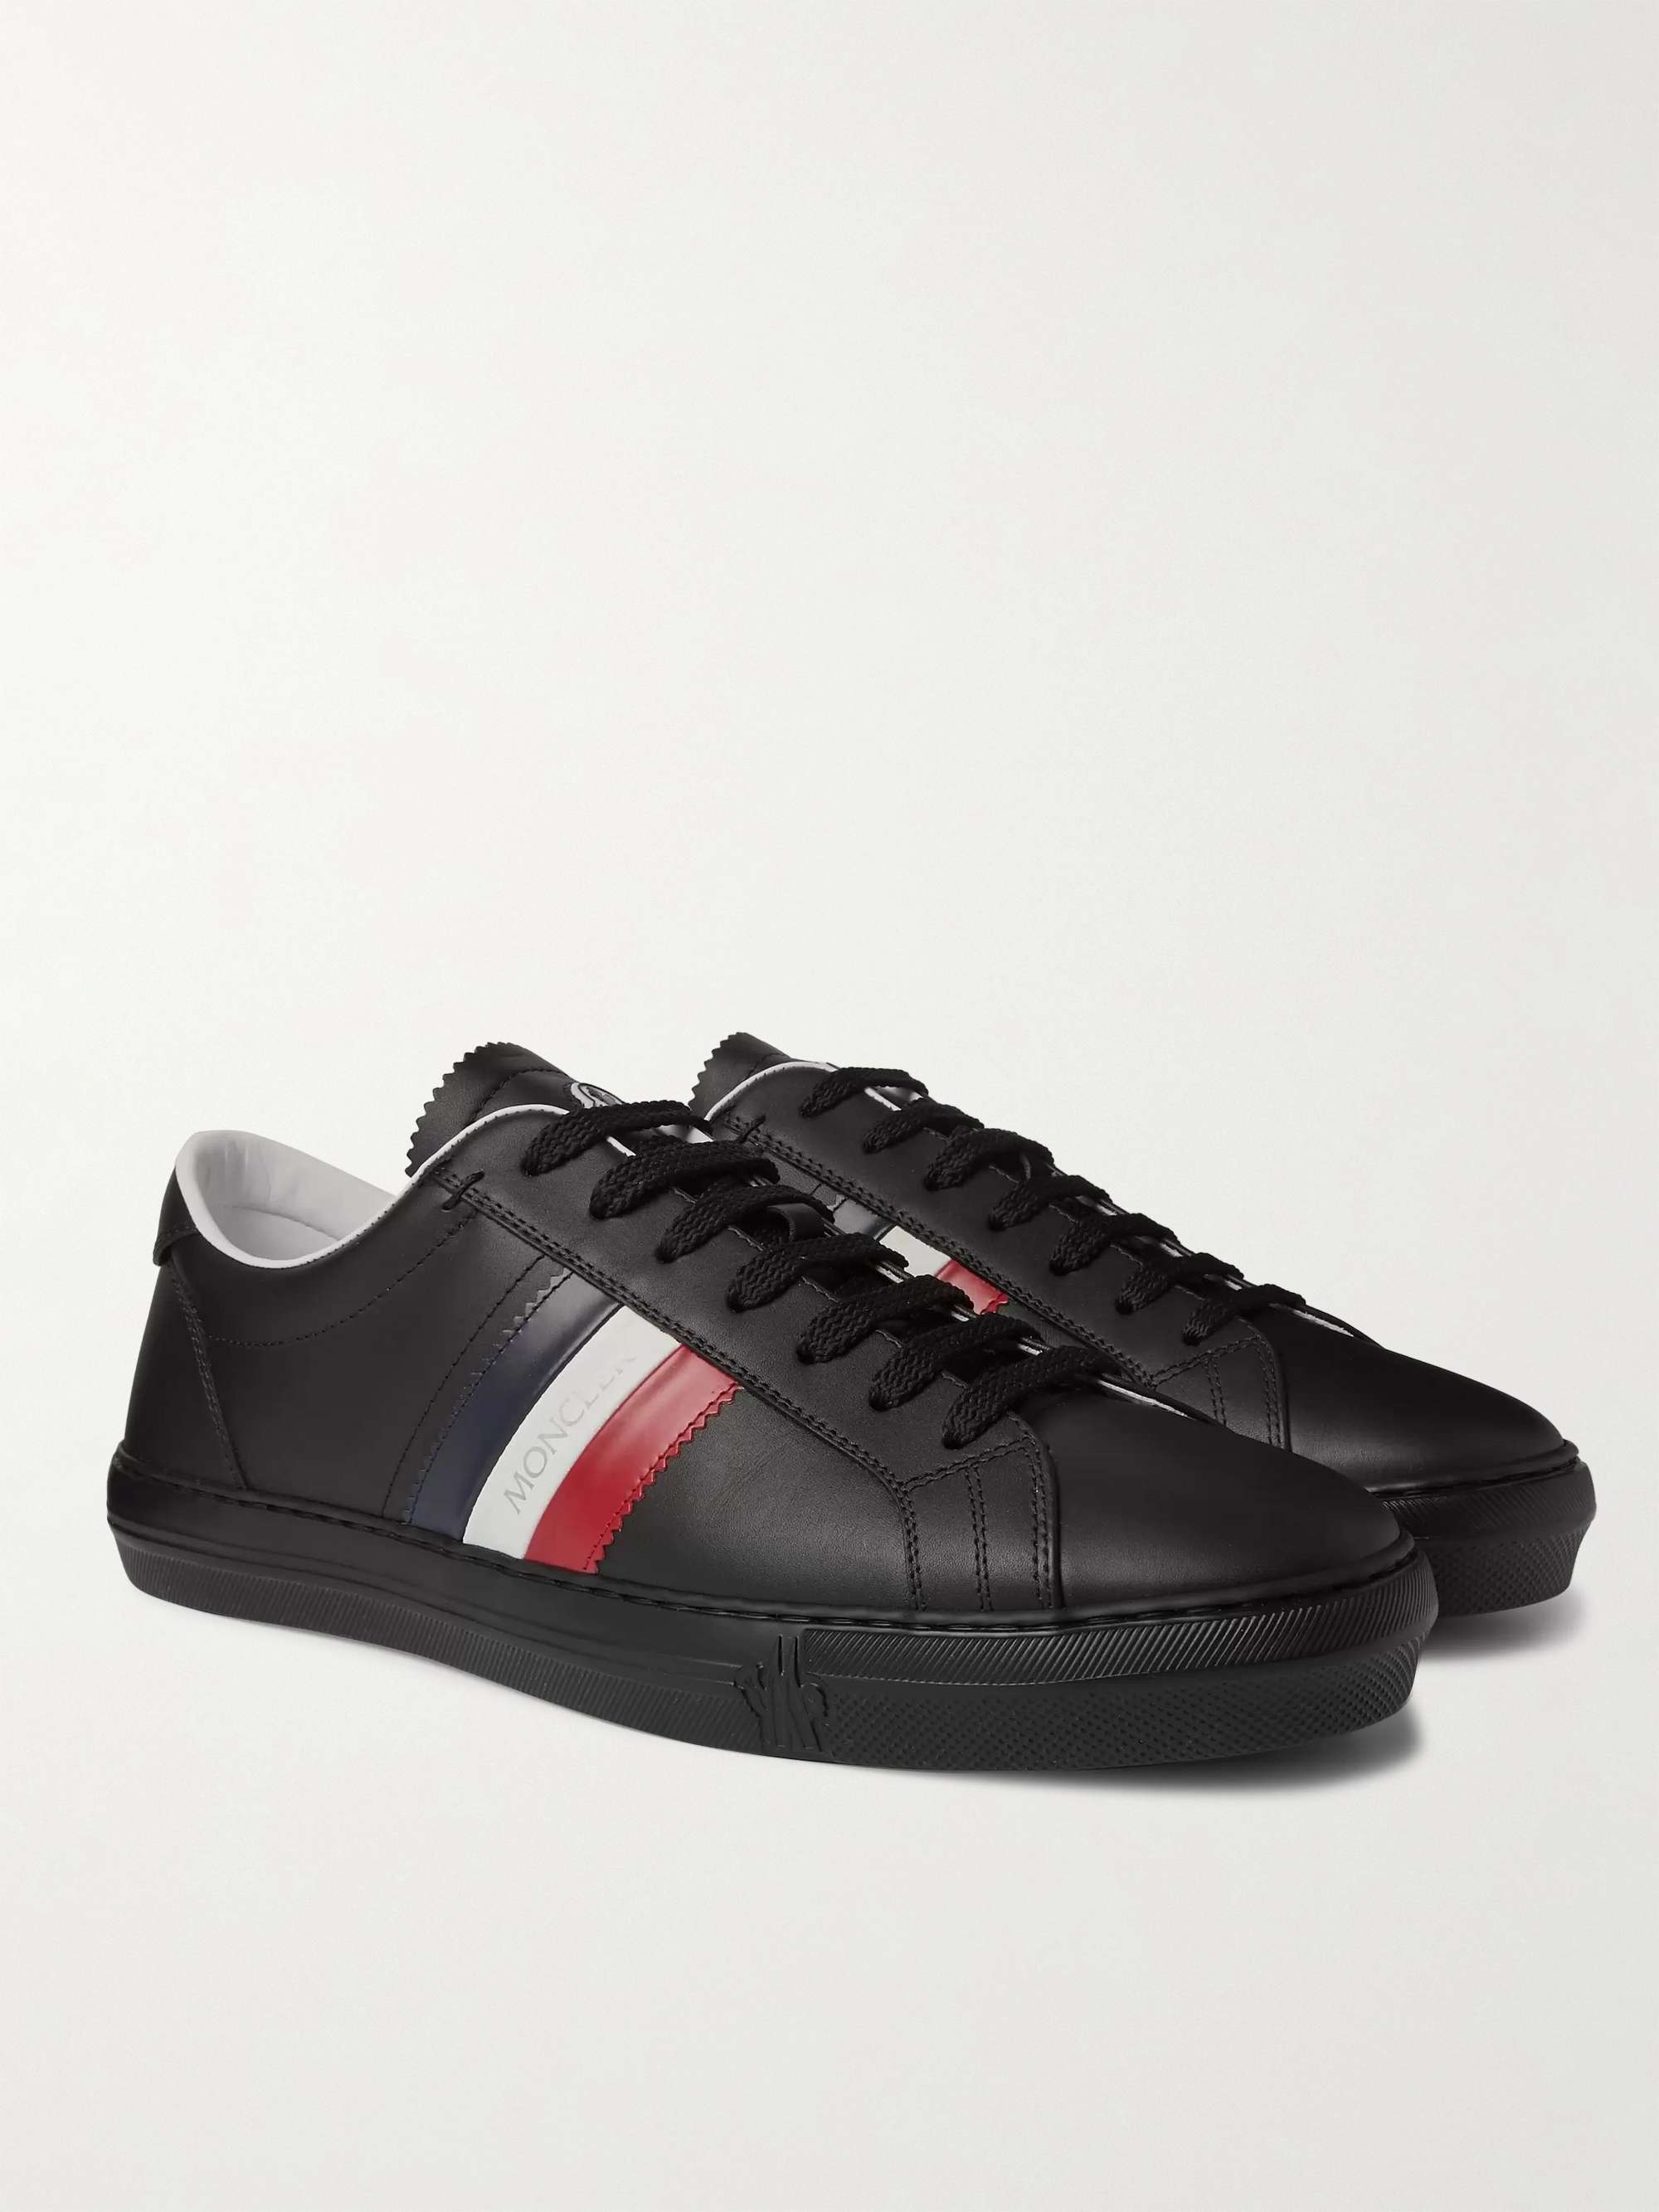 MONCLER New Monaco Striped Leather Sneakers | MR PORTER